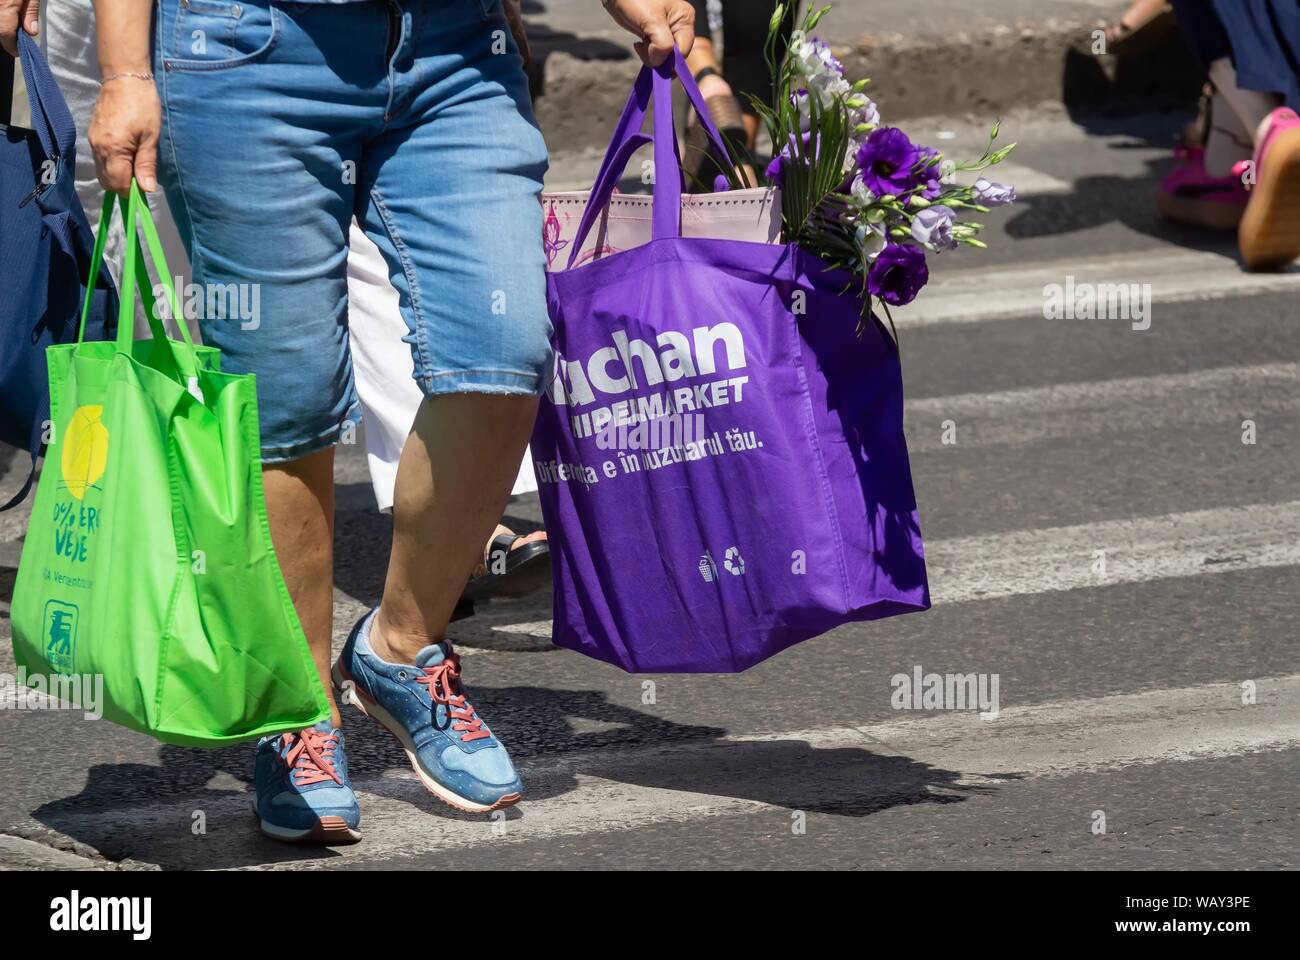 Bucharest, Romania - August 13, 2019: People carrying shopping bags cross a street in Bucharest. Stock Photo